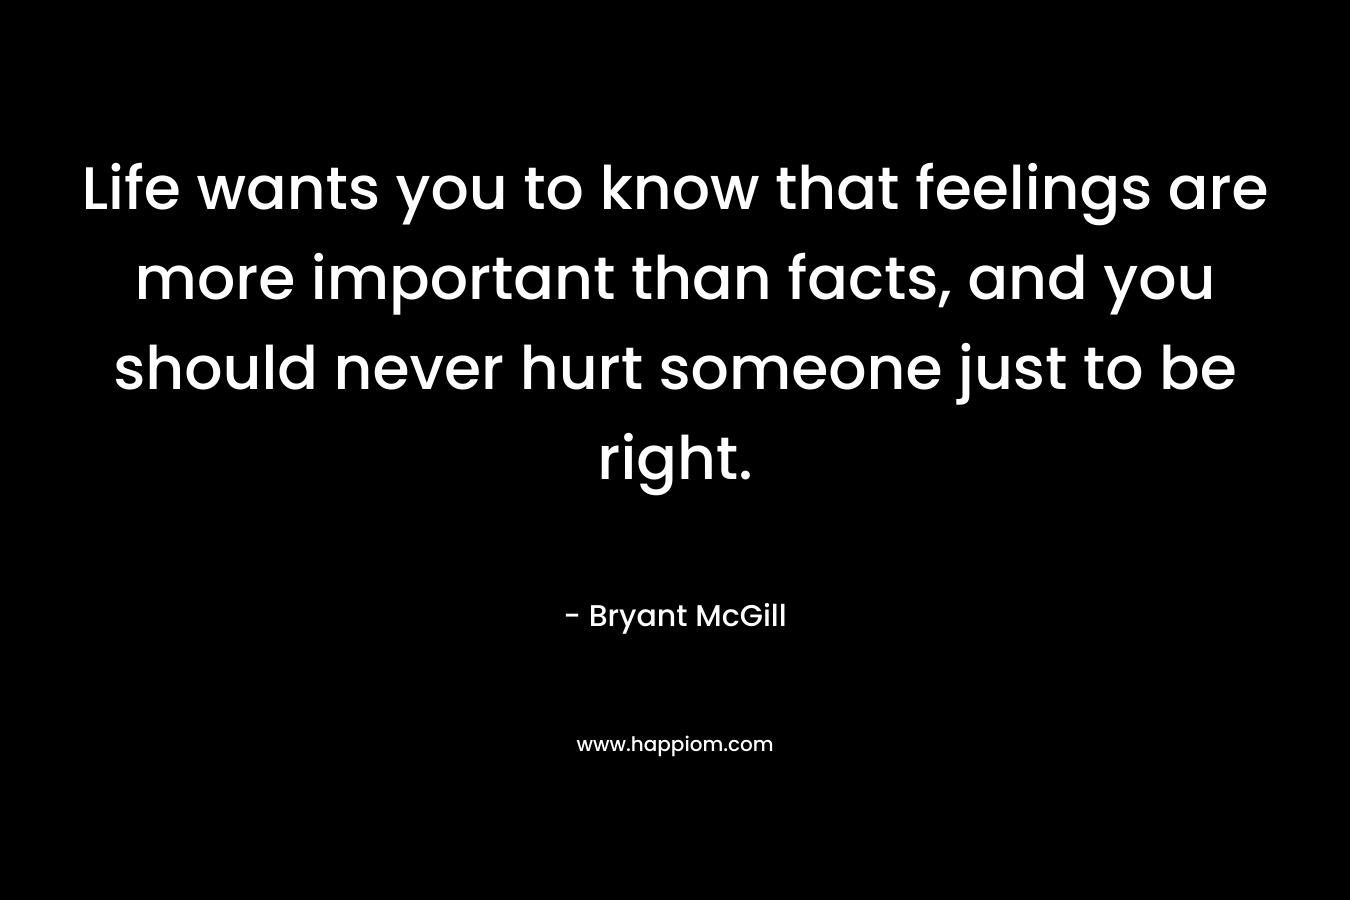 Life wants you to know that feelings are more important than facts, and you should never hurt someone just to be right.